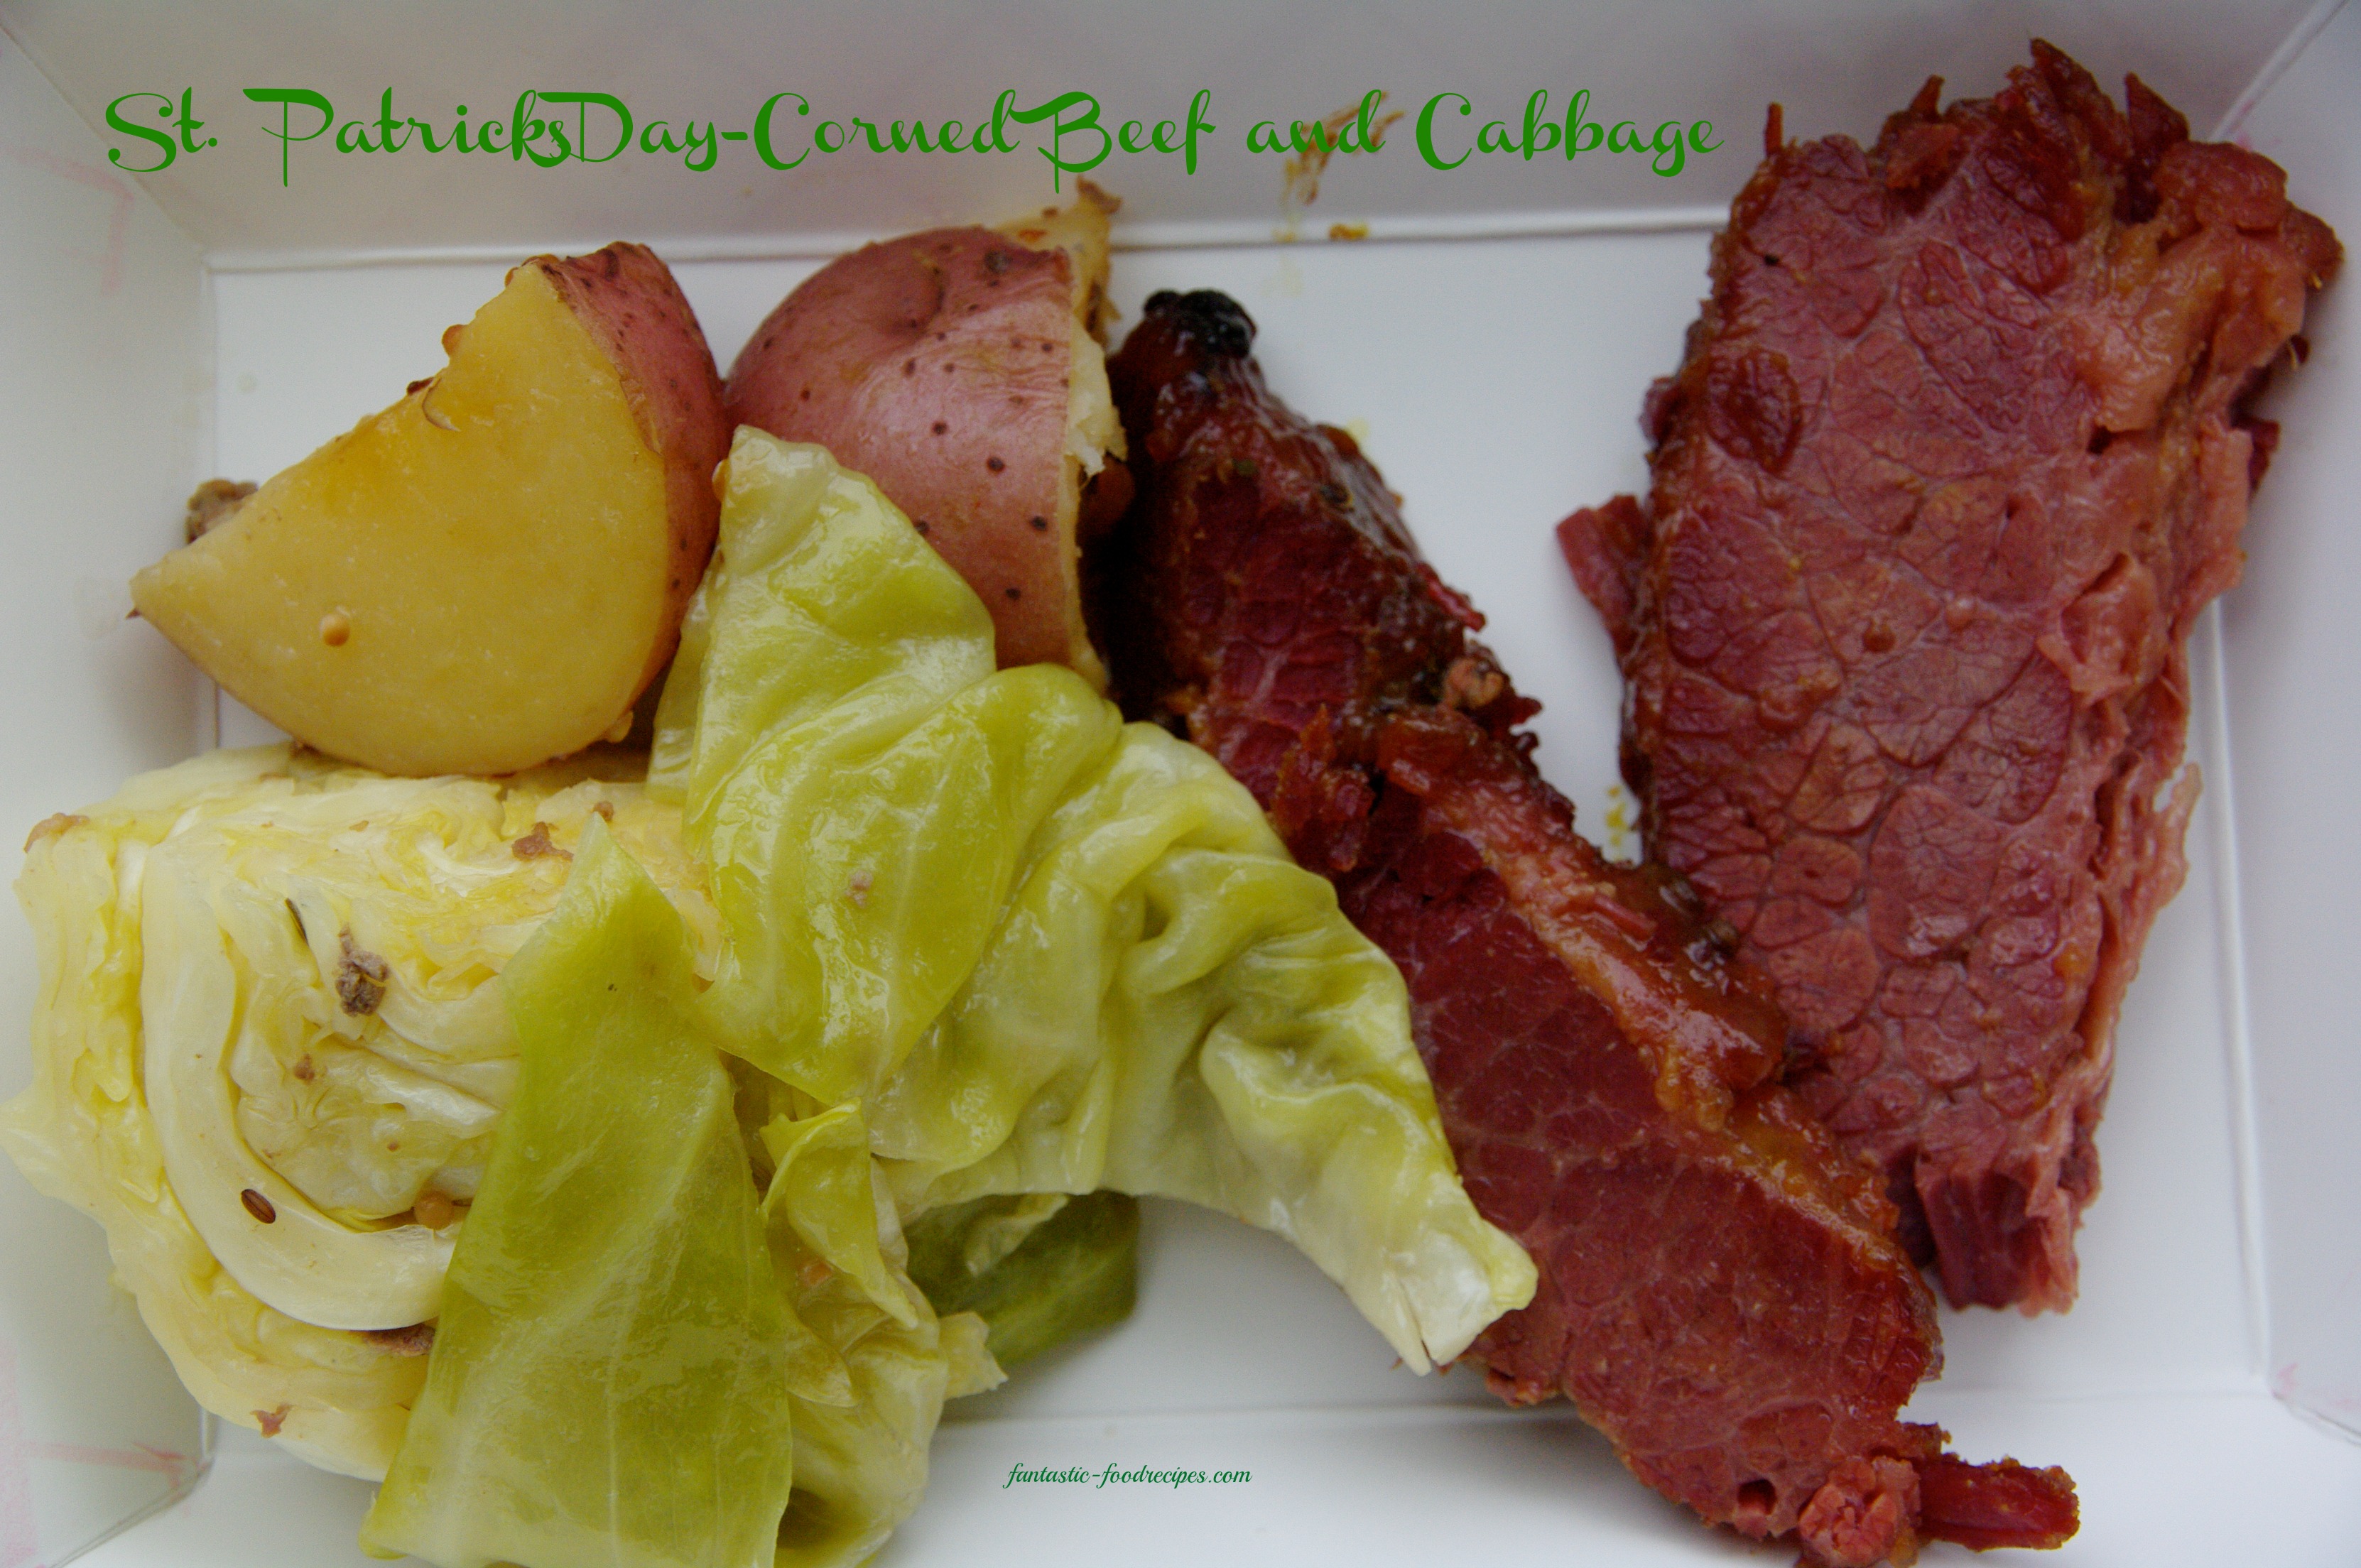 St. Patrick`s Day Corned Beef and Cabbage<p><!-- Google Ads Injected by Adsense Explosion 1.1.5 --><div class="adsxpls" id="adsxpls1" style="padding:7px; display: block; margin-left: auto; margin-right: auto; text-align: center;"><!-- AdSense Plugin Explosion num: 1 --><script type="text/javascript"><!--

google_ad_client = "pub-2565385867994440"; google_alternate_color = "FFFFFF";
google_ad_width = 234; google_ad_height = 60; google_ad_format = "234x60_as";
google_ad_type = "text_image";
google_ad_channel ="0092551593"; google_color_border = "336699";
google_color_link = "0000FF"; google_color_bg = "FFFFFF";
google_color_text = "000000"; google_color_url = "008000";
google_ui_features = "rc:6"; //--></script>
<script type="text/javascript" src="http://pagead2.googlesyndication.com/pagead/show_ads.js"></script></div></p>